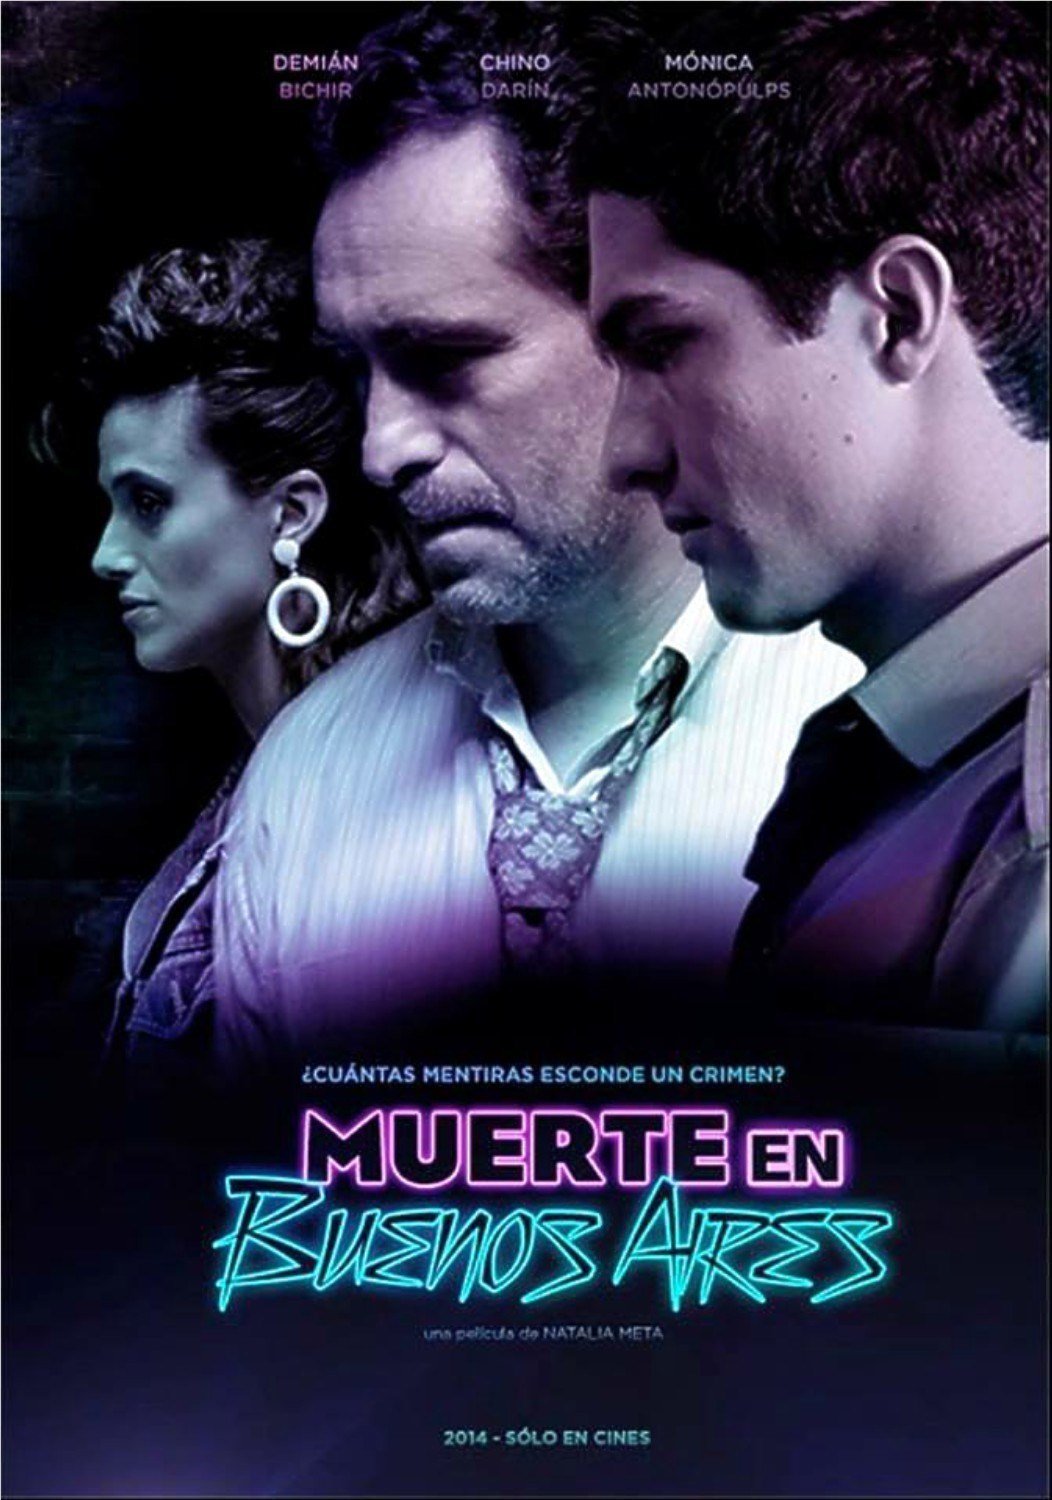 Spanish poster of the movie Muerte en Buenos Aires